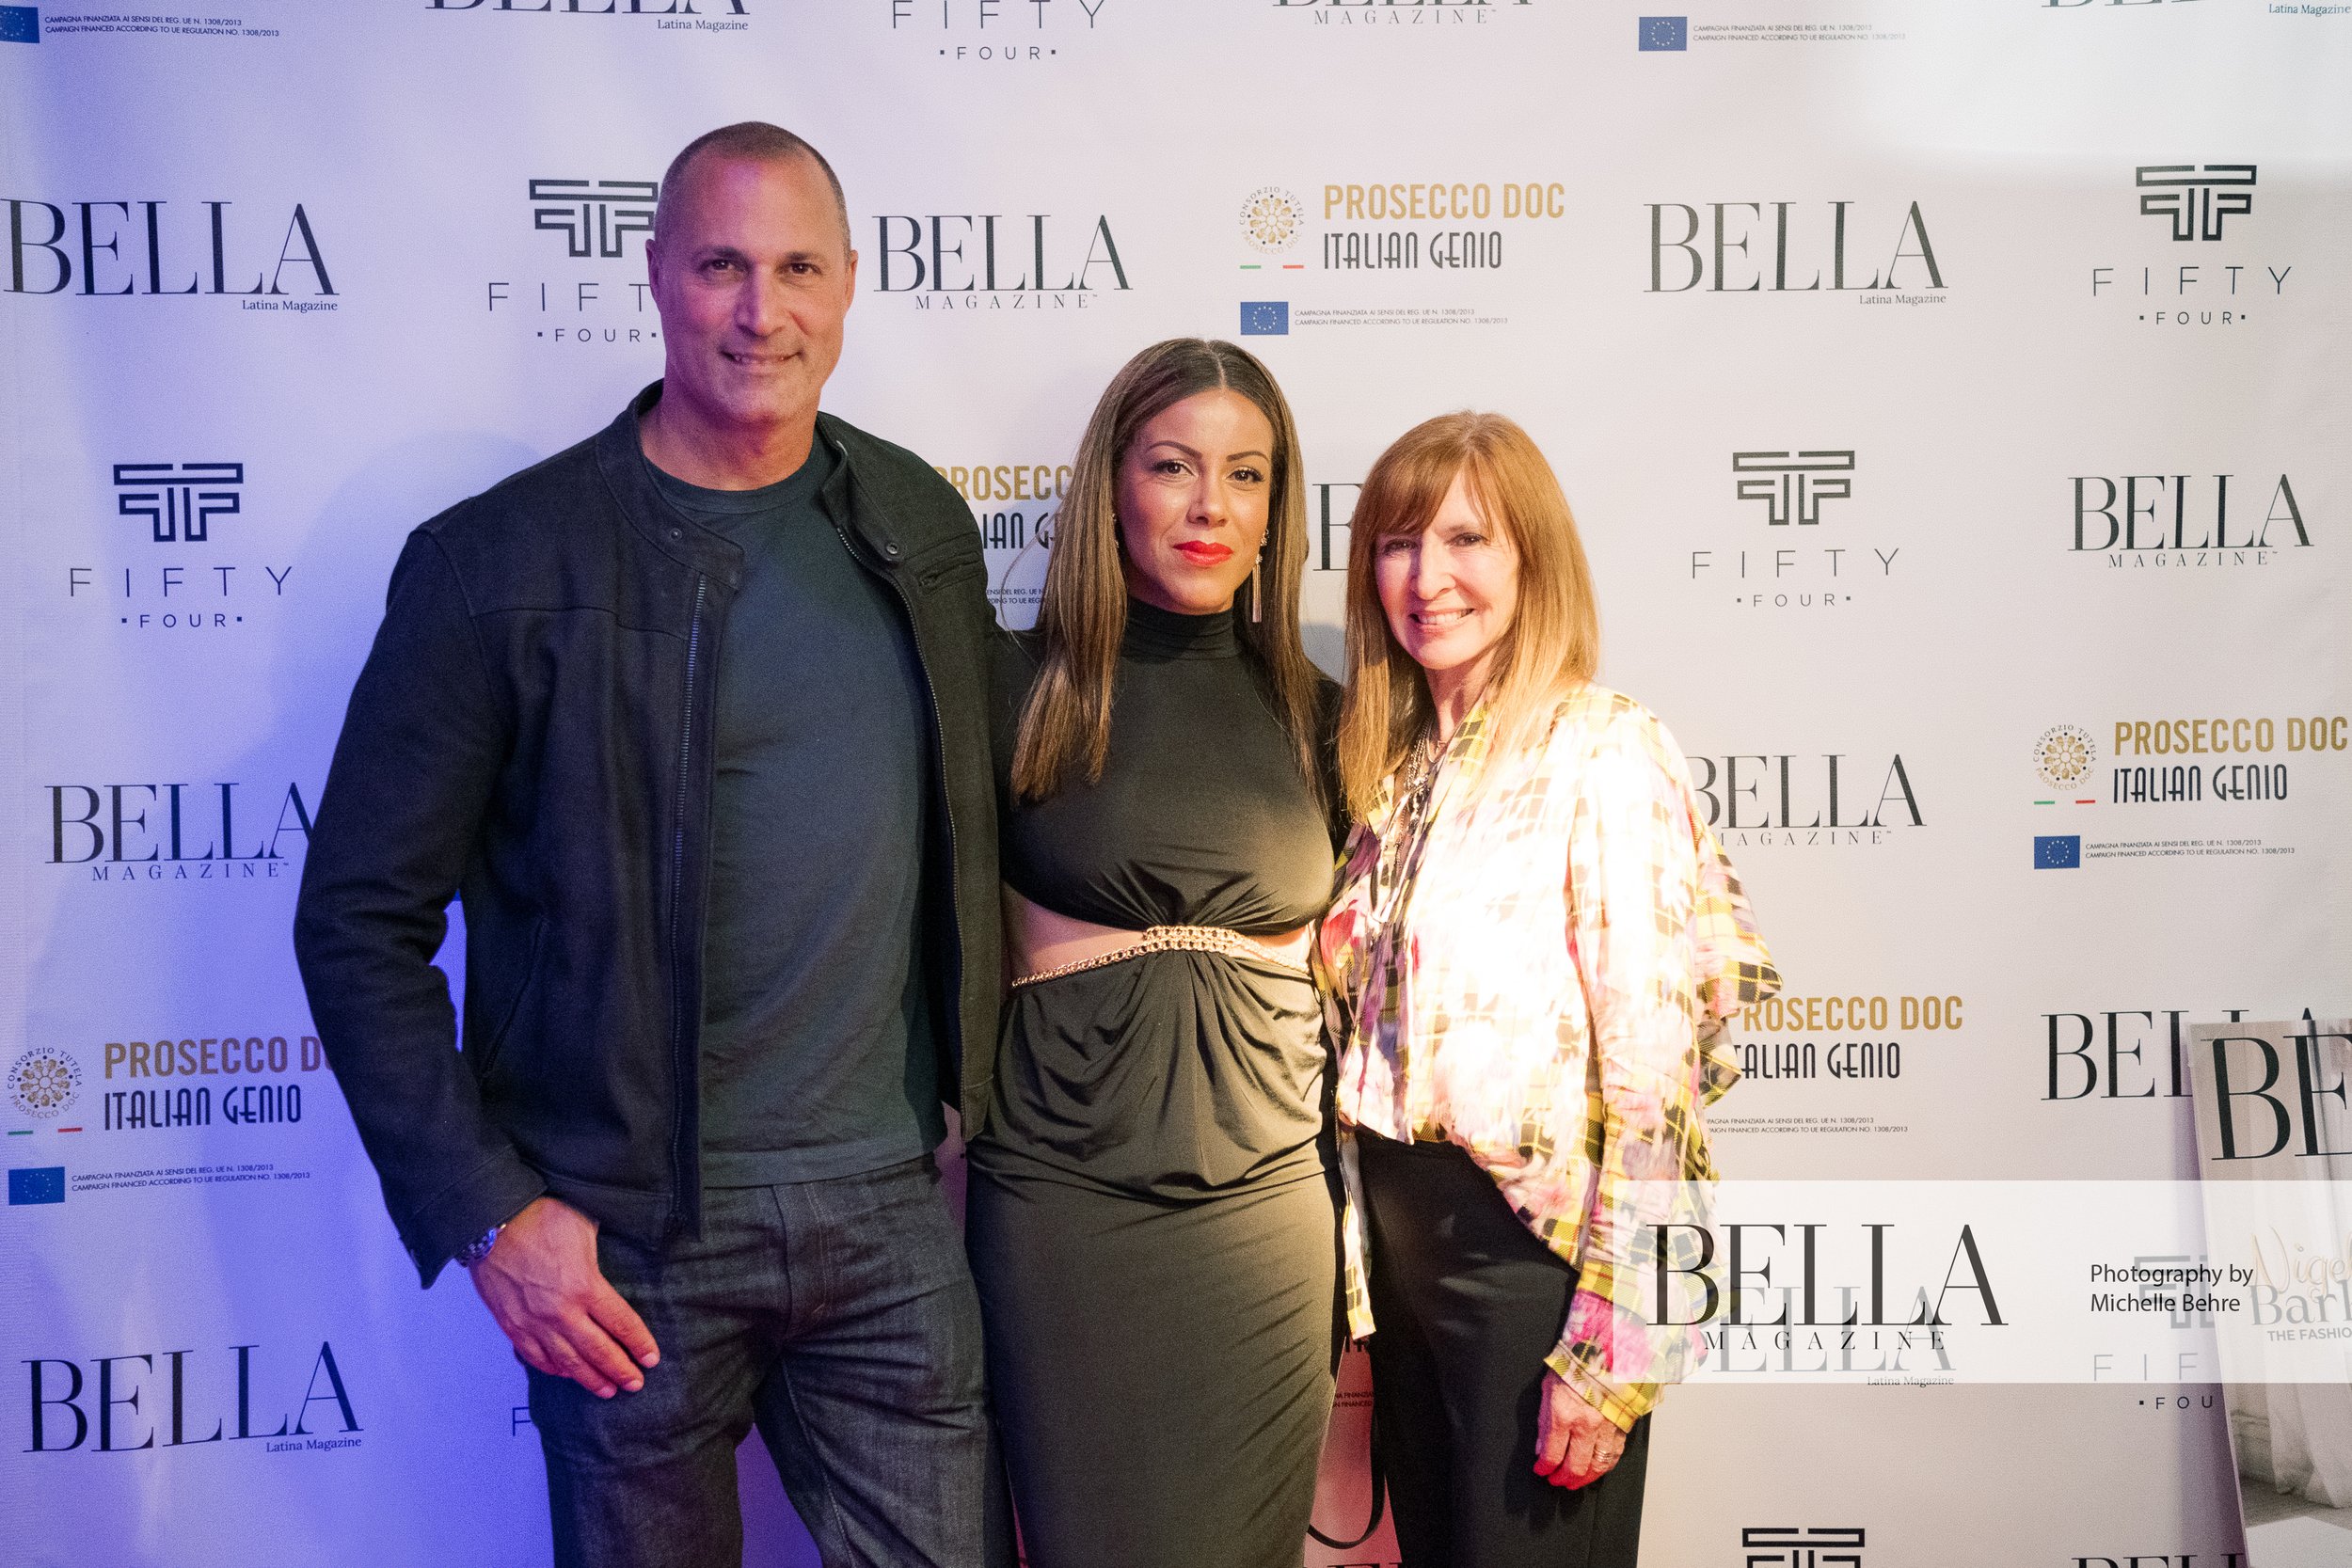 BELLA-Magazine-September-Issue-Cover-Event-Fifty-Four-149 2.jpg